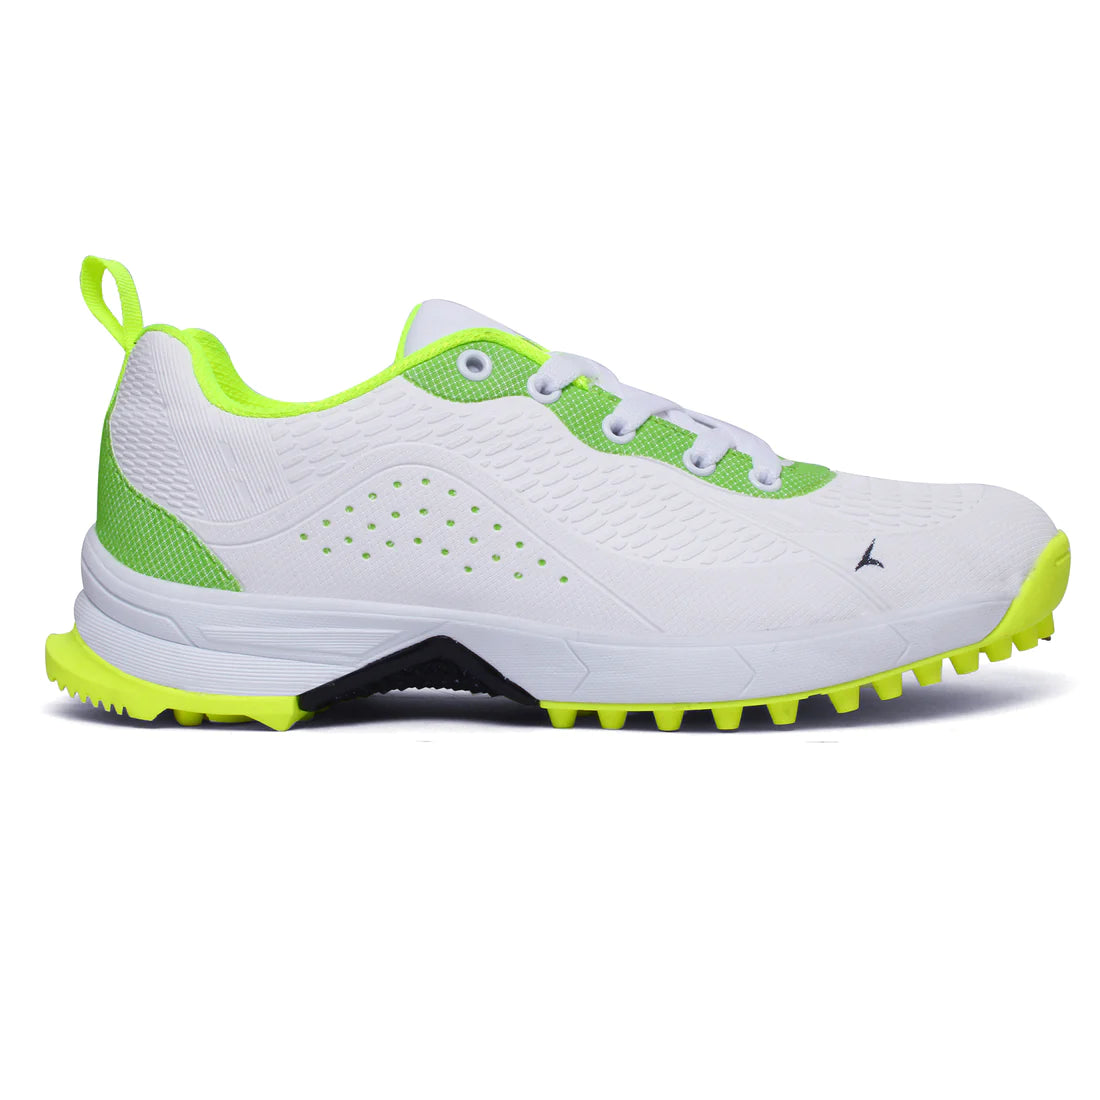 Tracer T-Spinner 194 Rubber Studs Cricket Shoes - White/Green